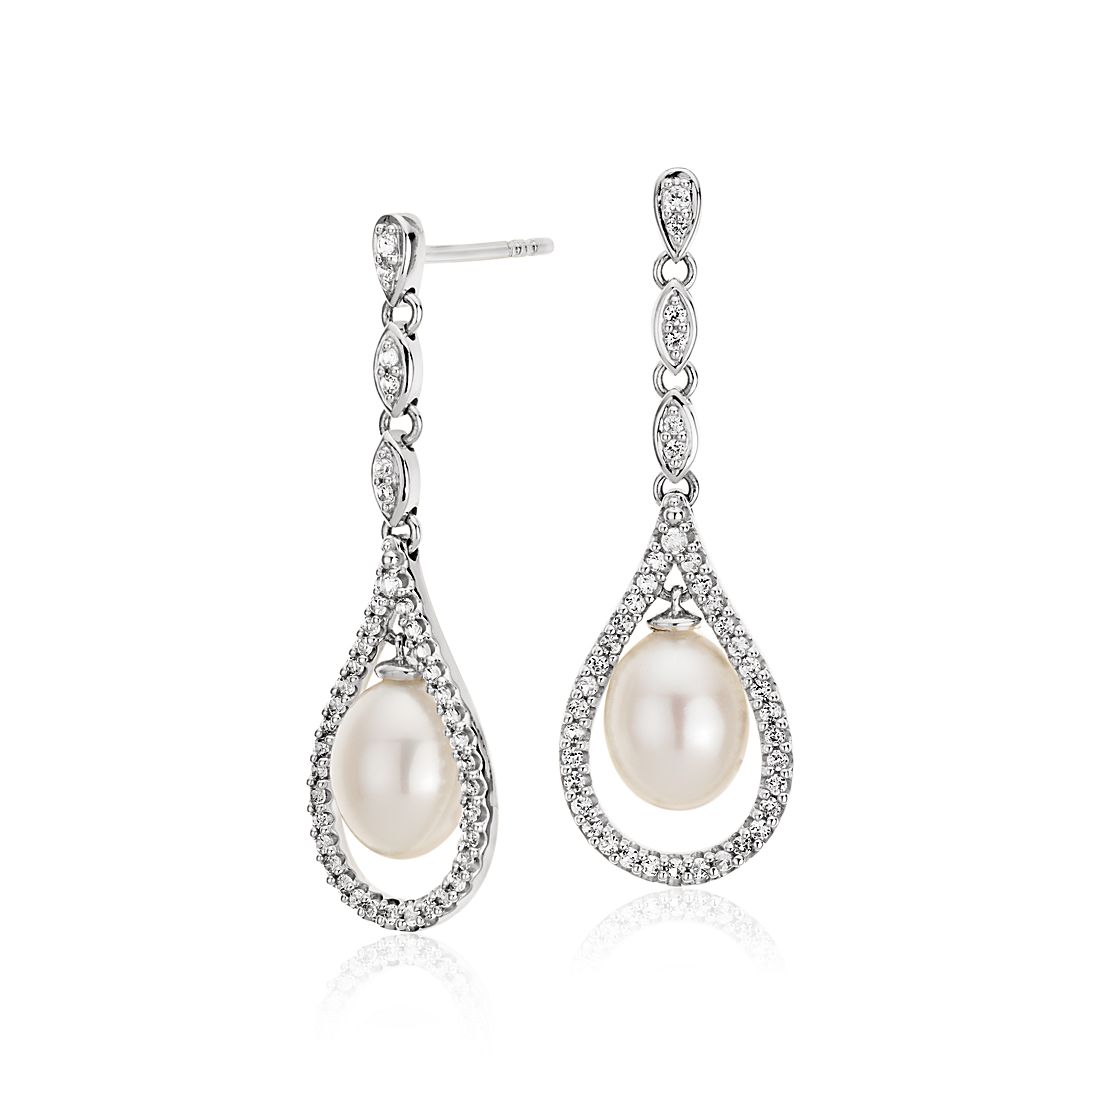 bluenile.com | Vintage-Inspired Freshwater Cultured Pearl and White Topaz Drop Earrings in Sterling Silver (6-7mm)